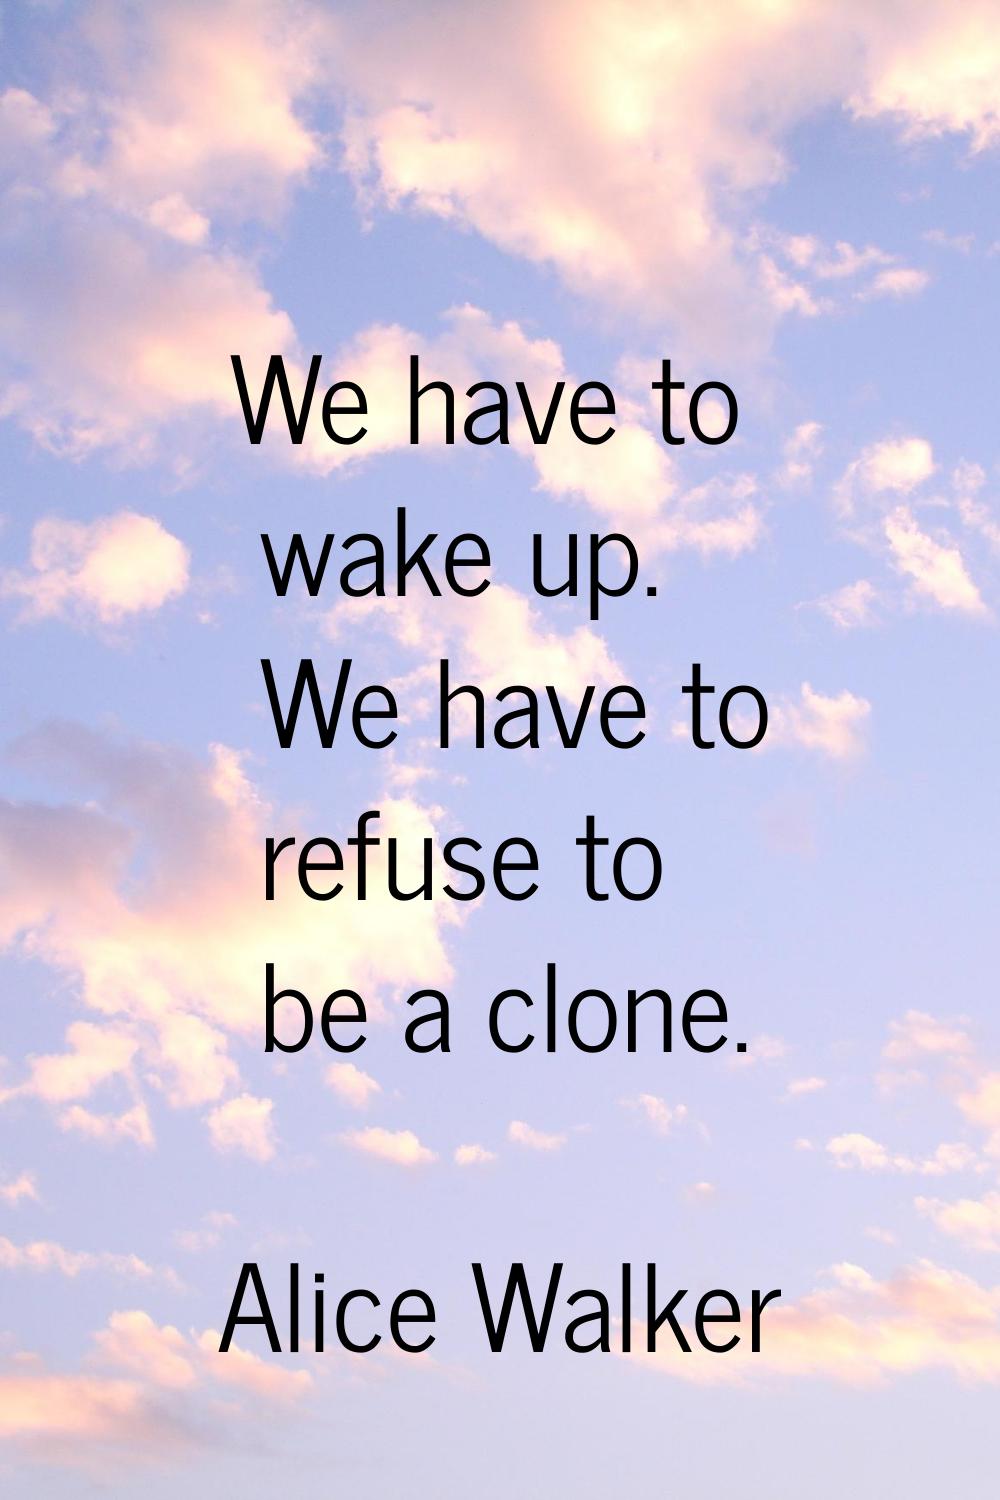 We have to wake up. We have to refuse to be a clone.